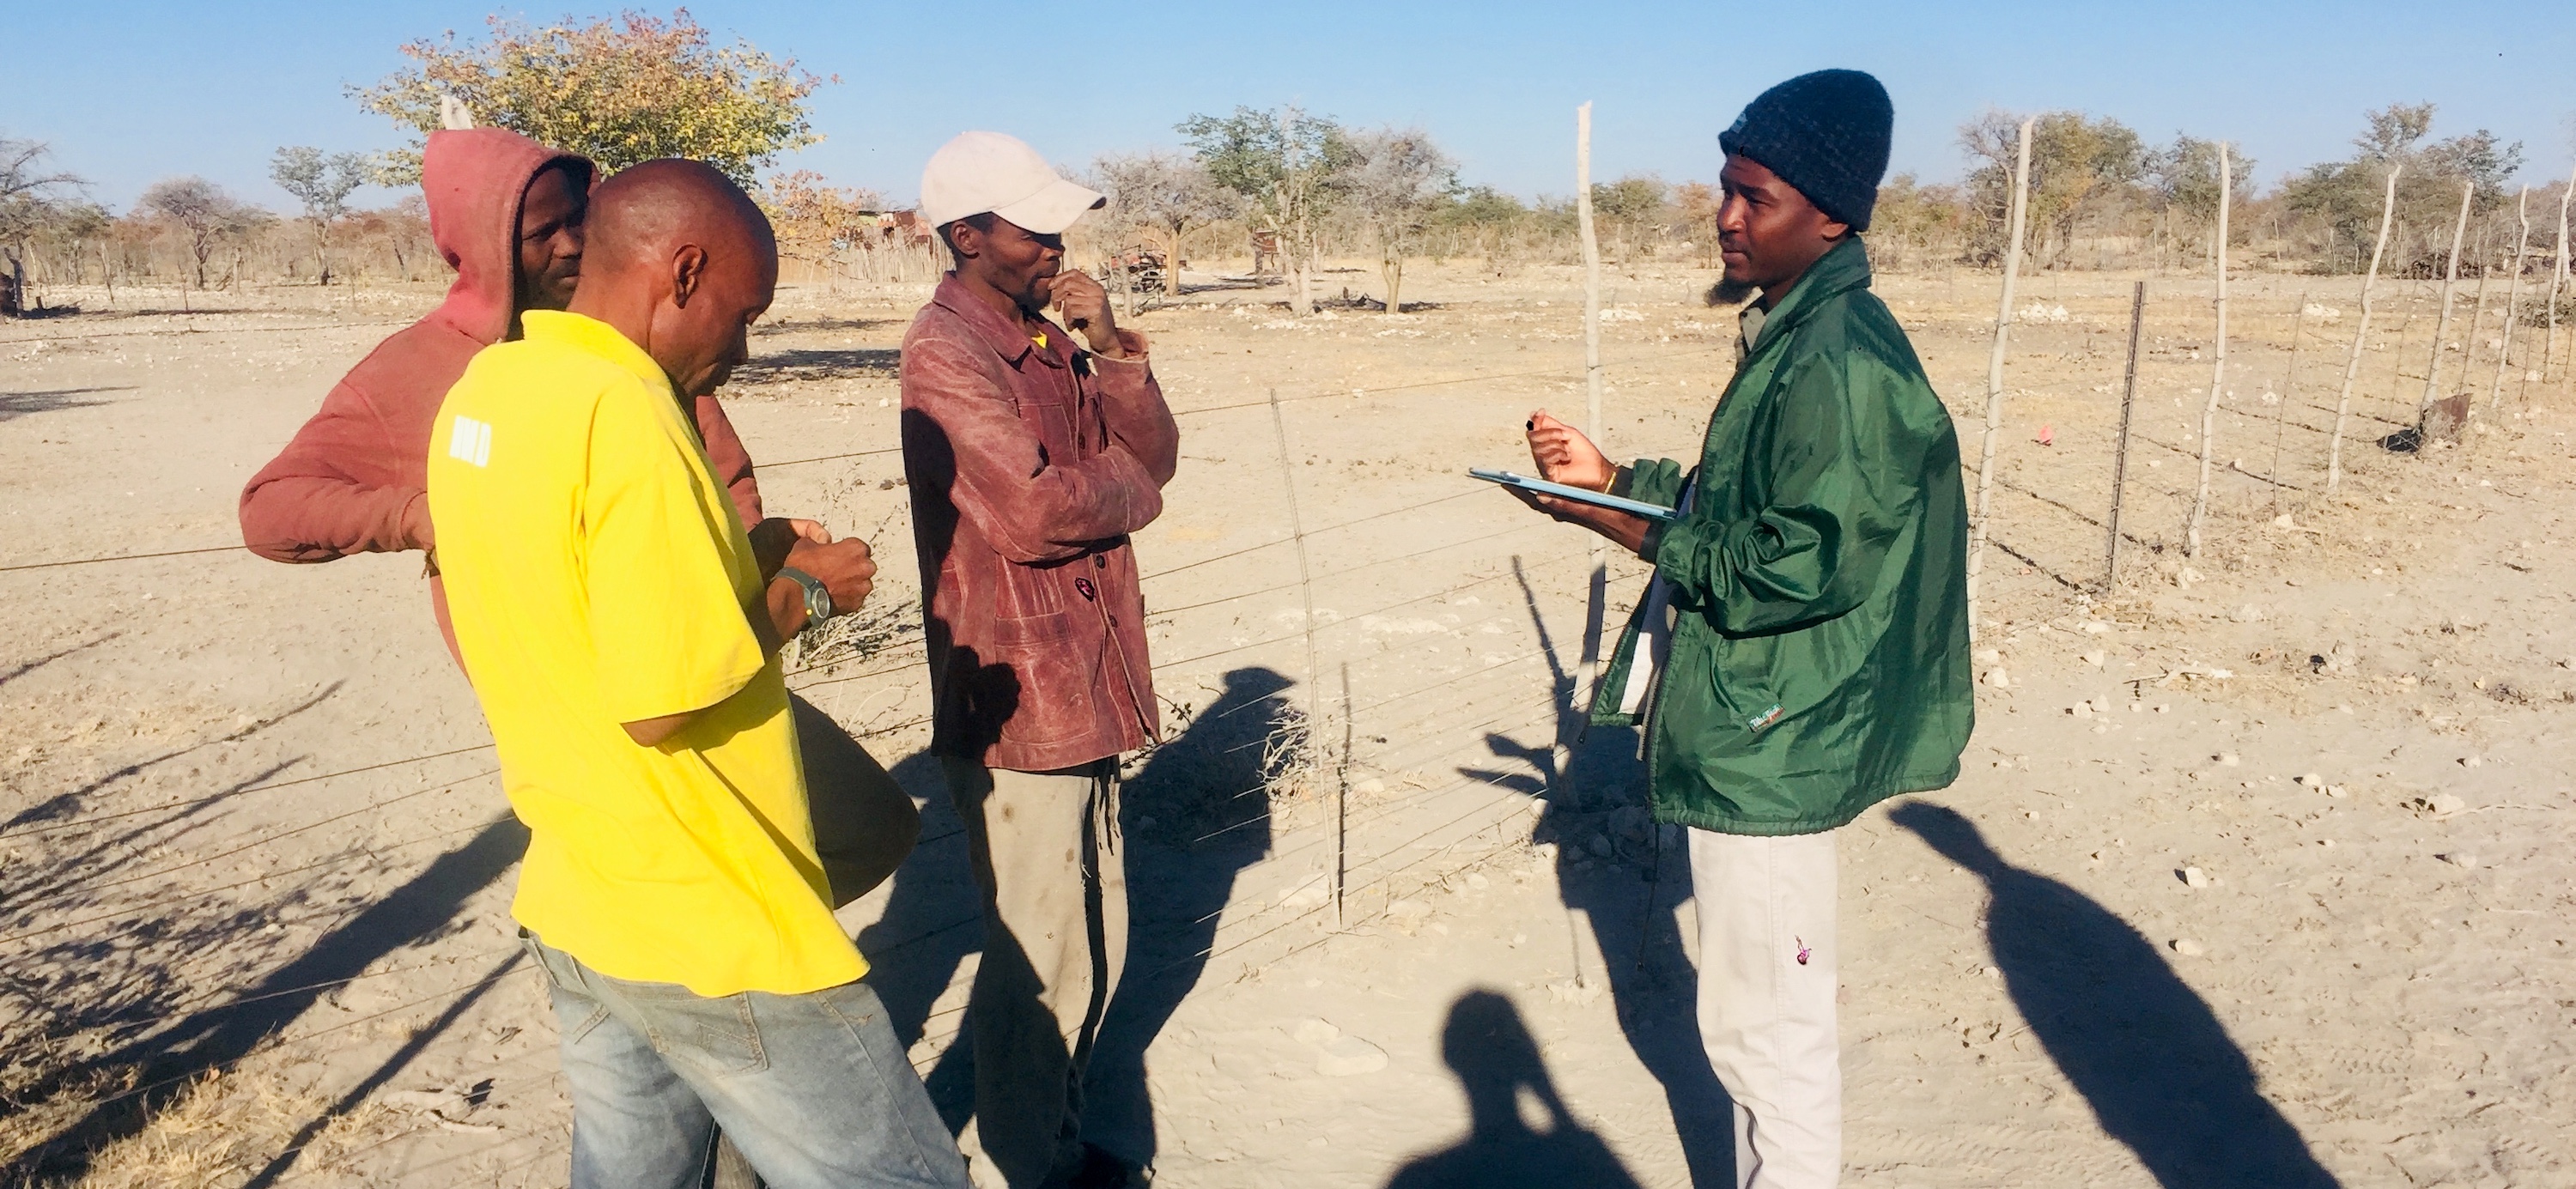 A group of men standing next to a kraal, while one (the author) takes notes.